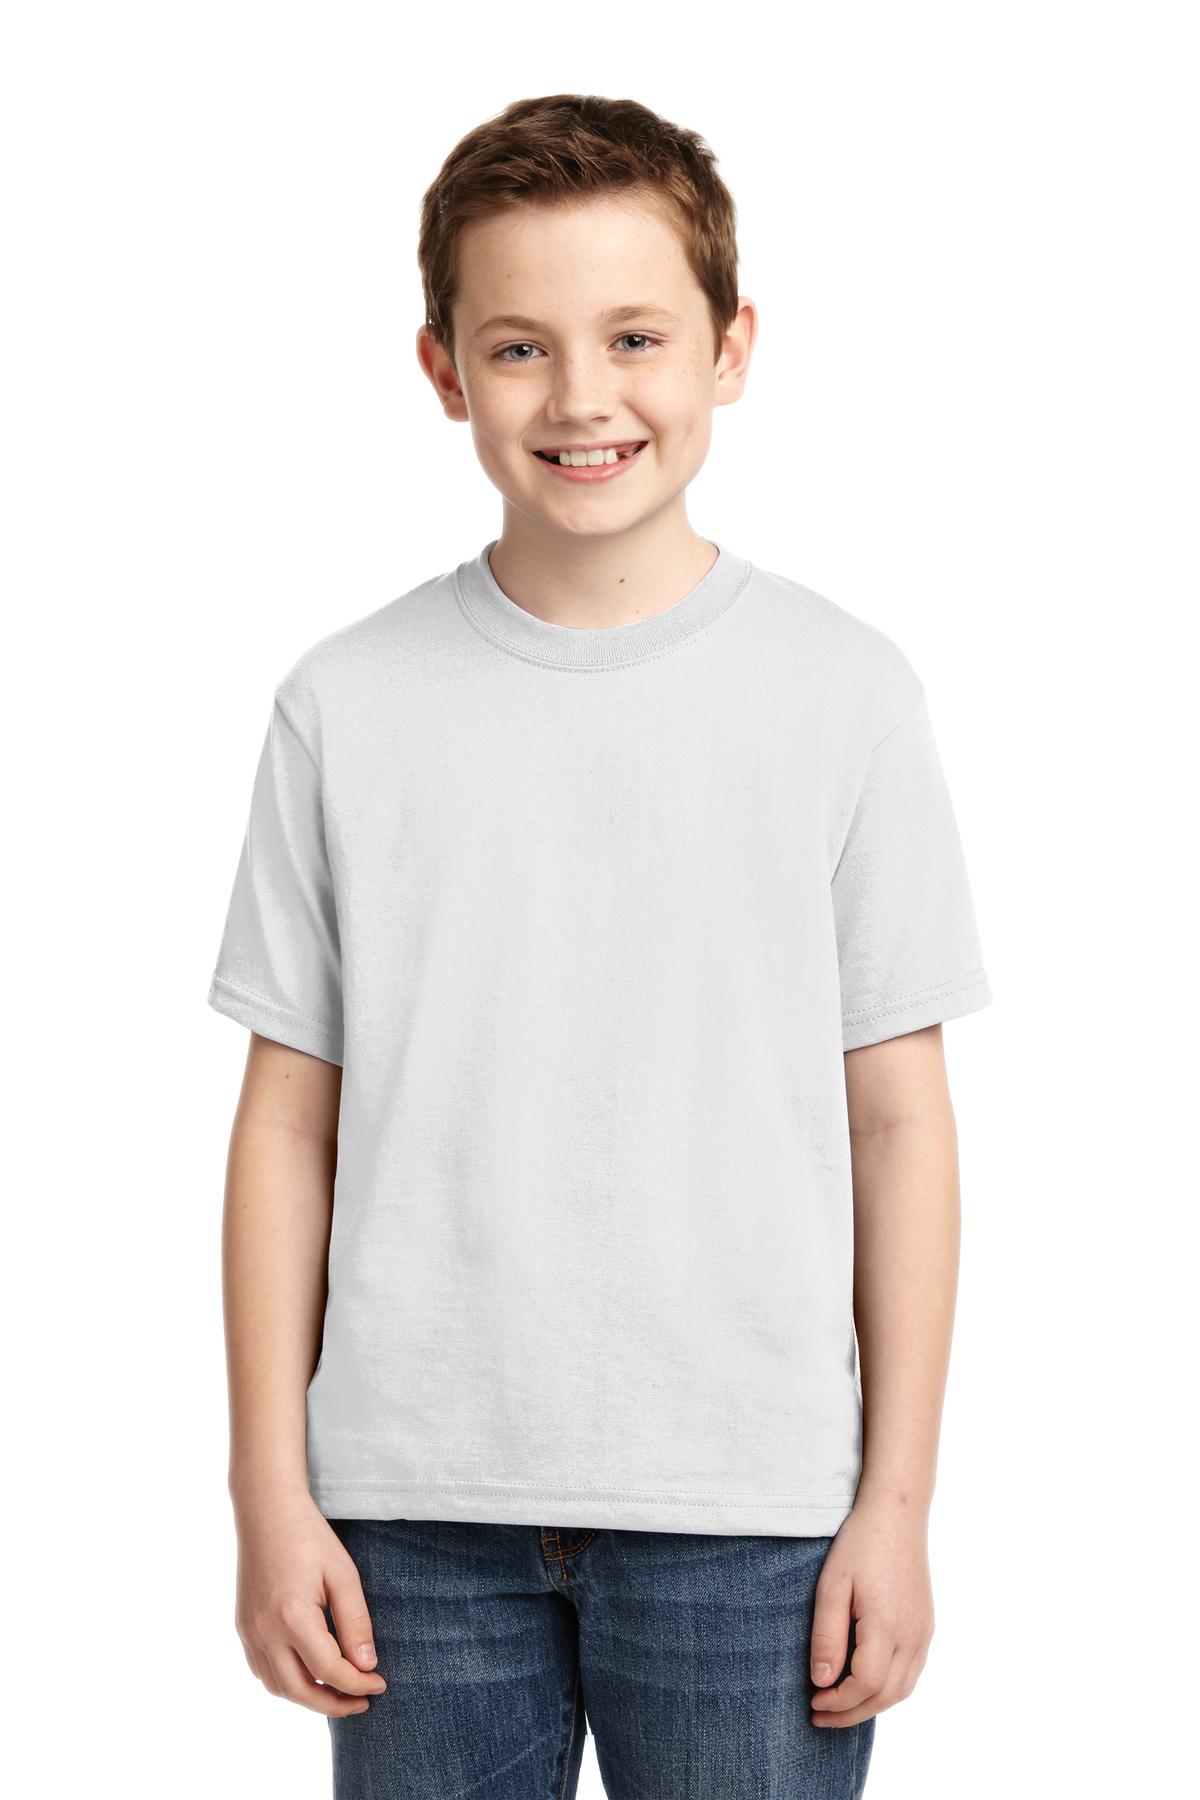 JERZEES - Youth Dri-Power Active 50/50 Cotton/Poly T-Shirt. 29B